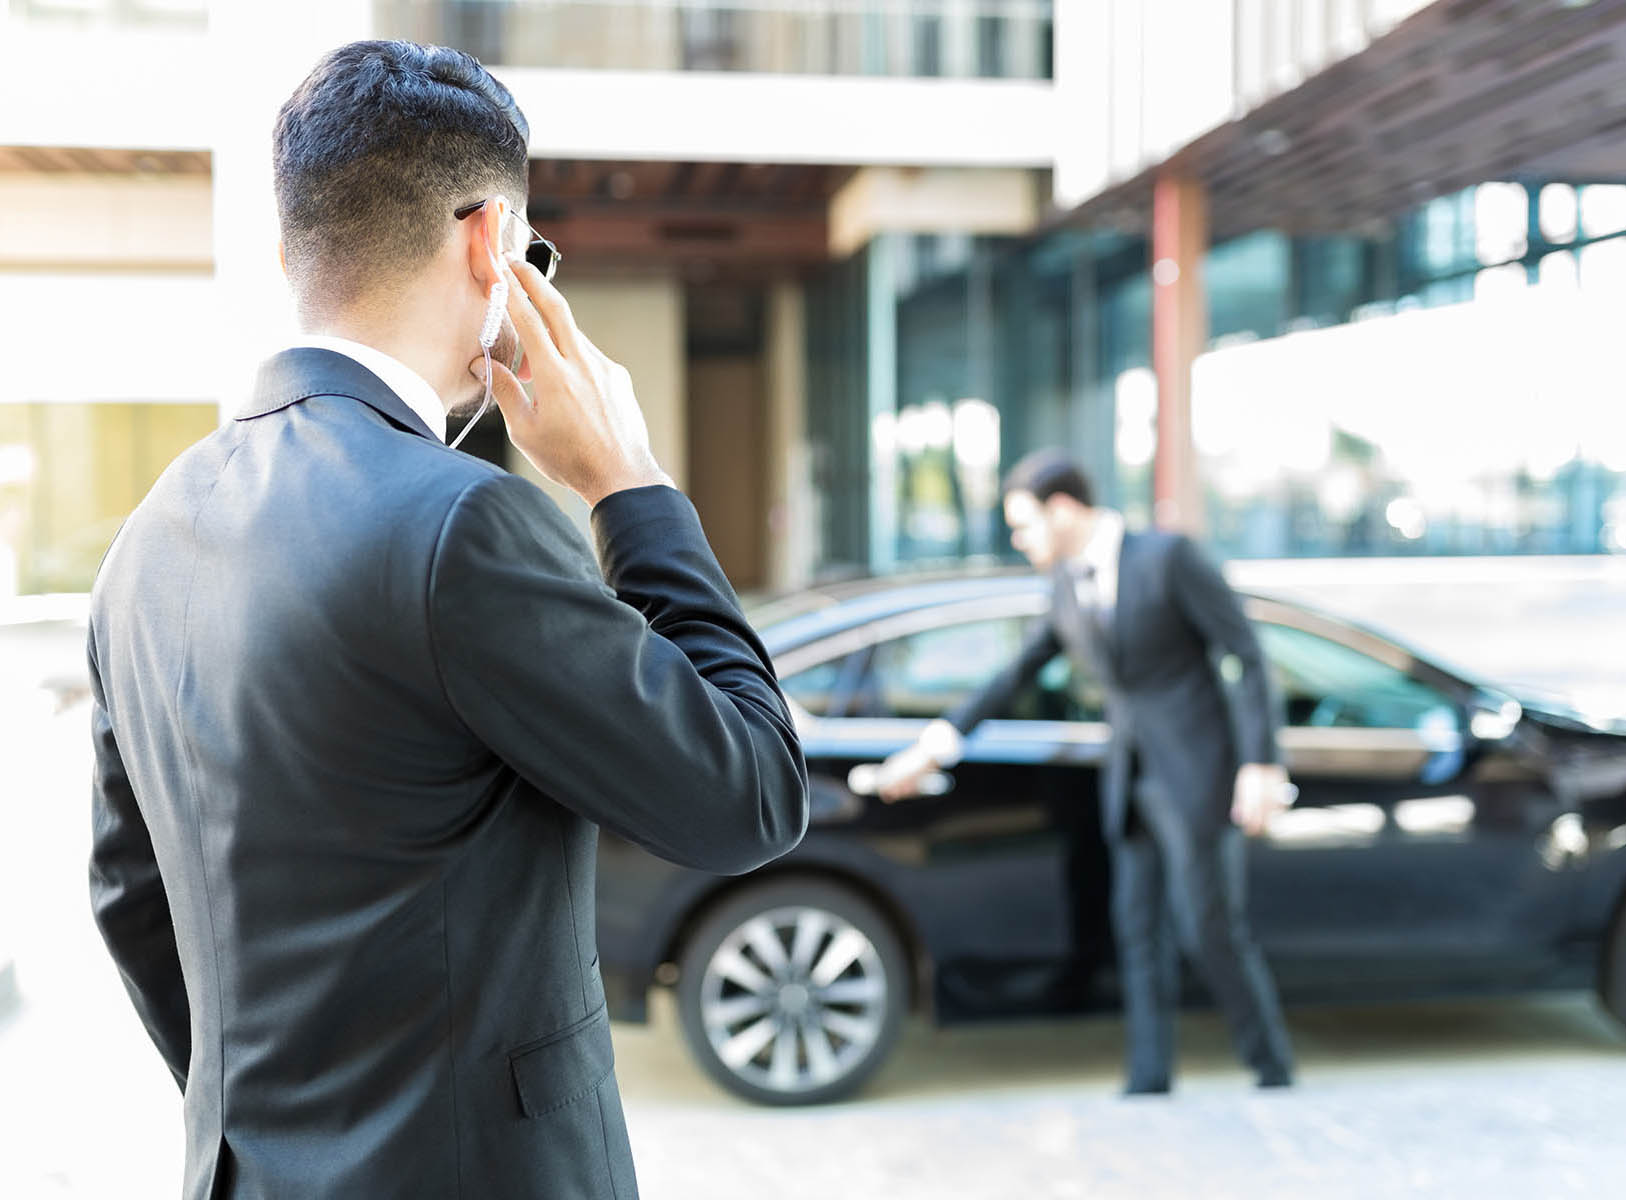 Protection agent in suit getting constant updates through earpiece to avoid danger